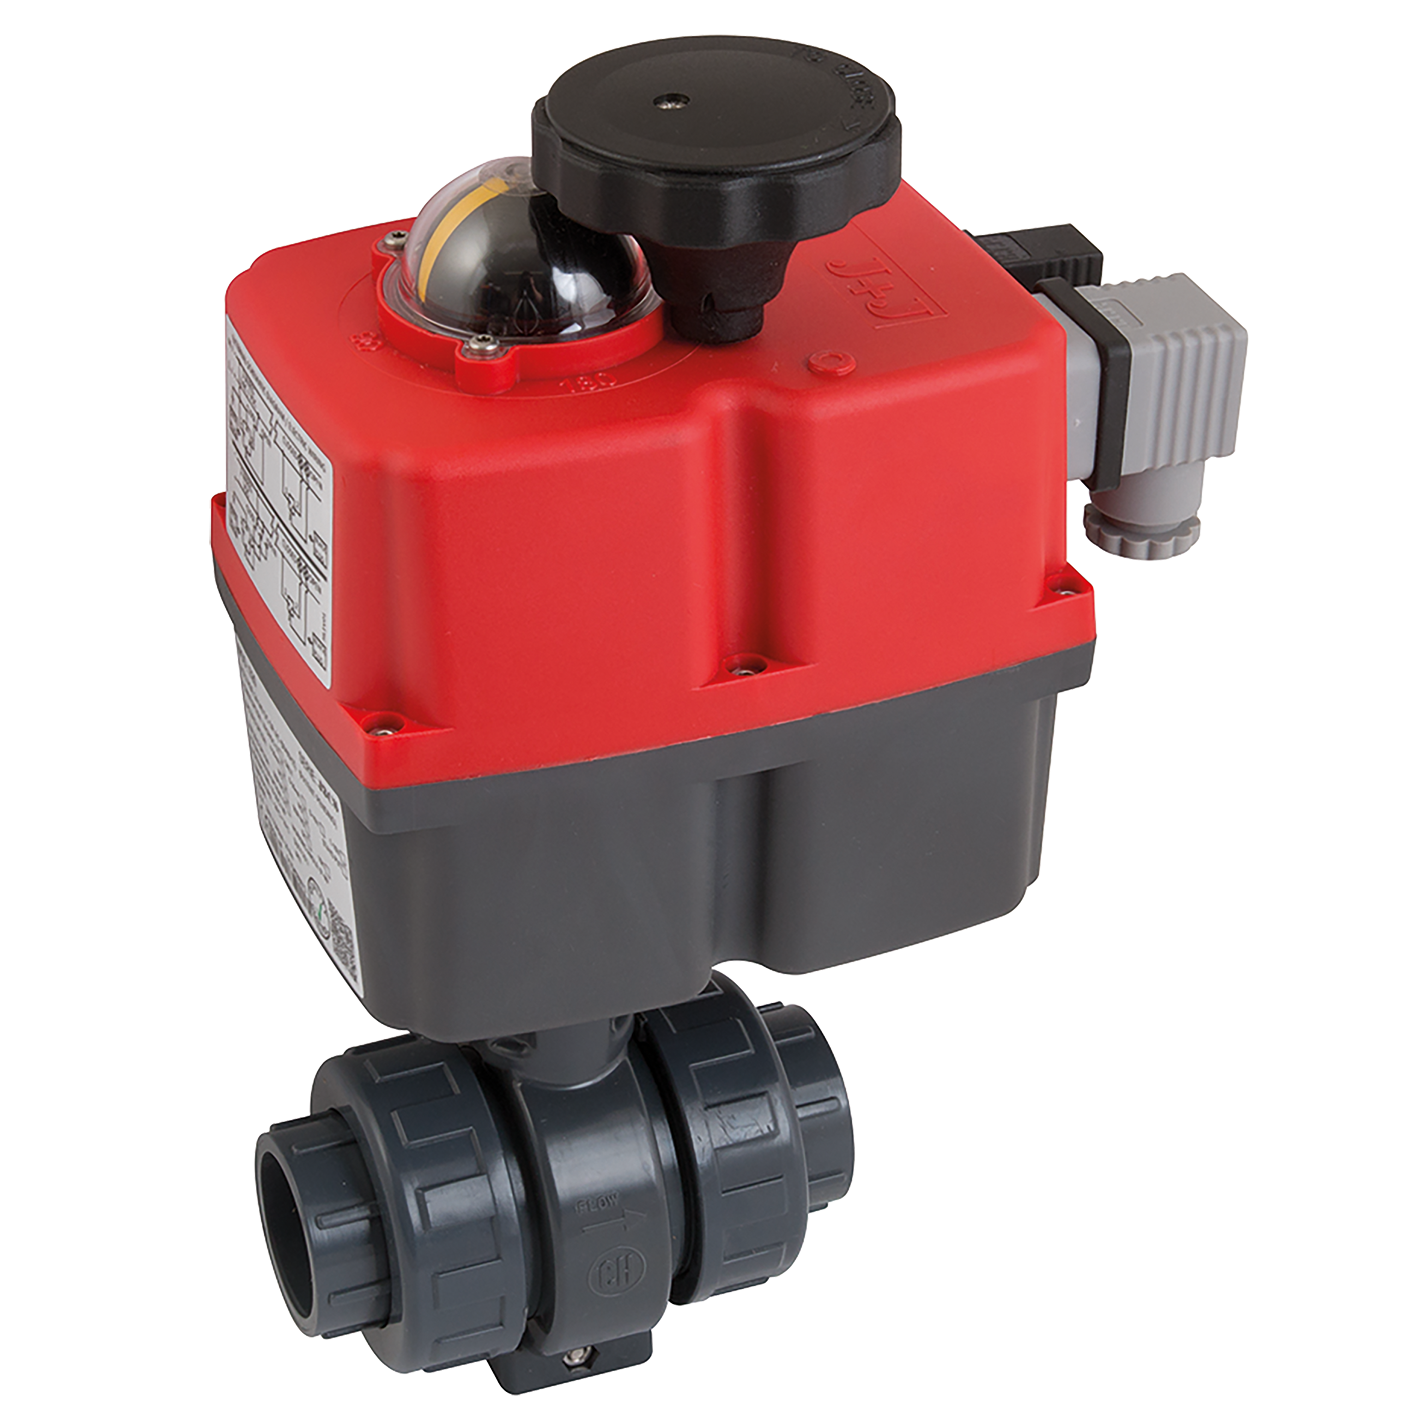 Suppliers of Electric Actuated Plastic Ball Valve UK